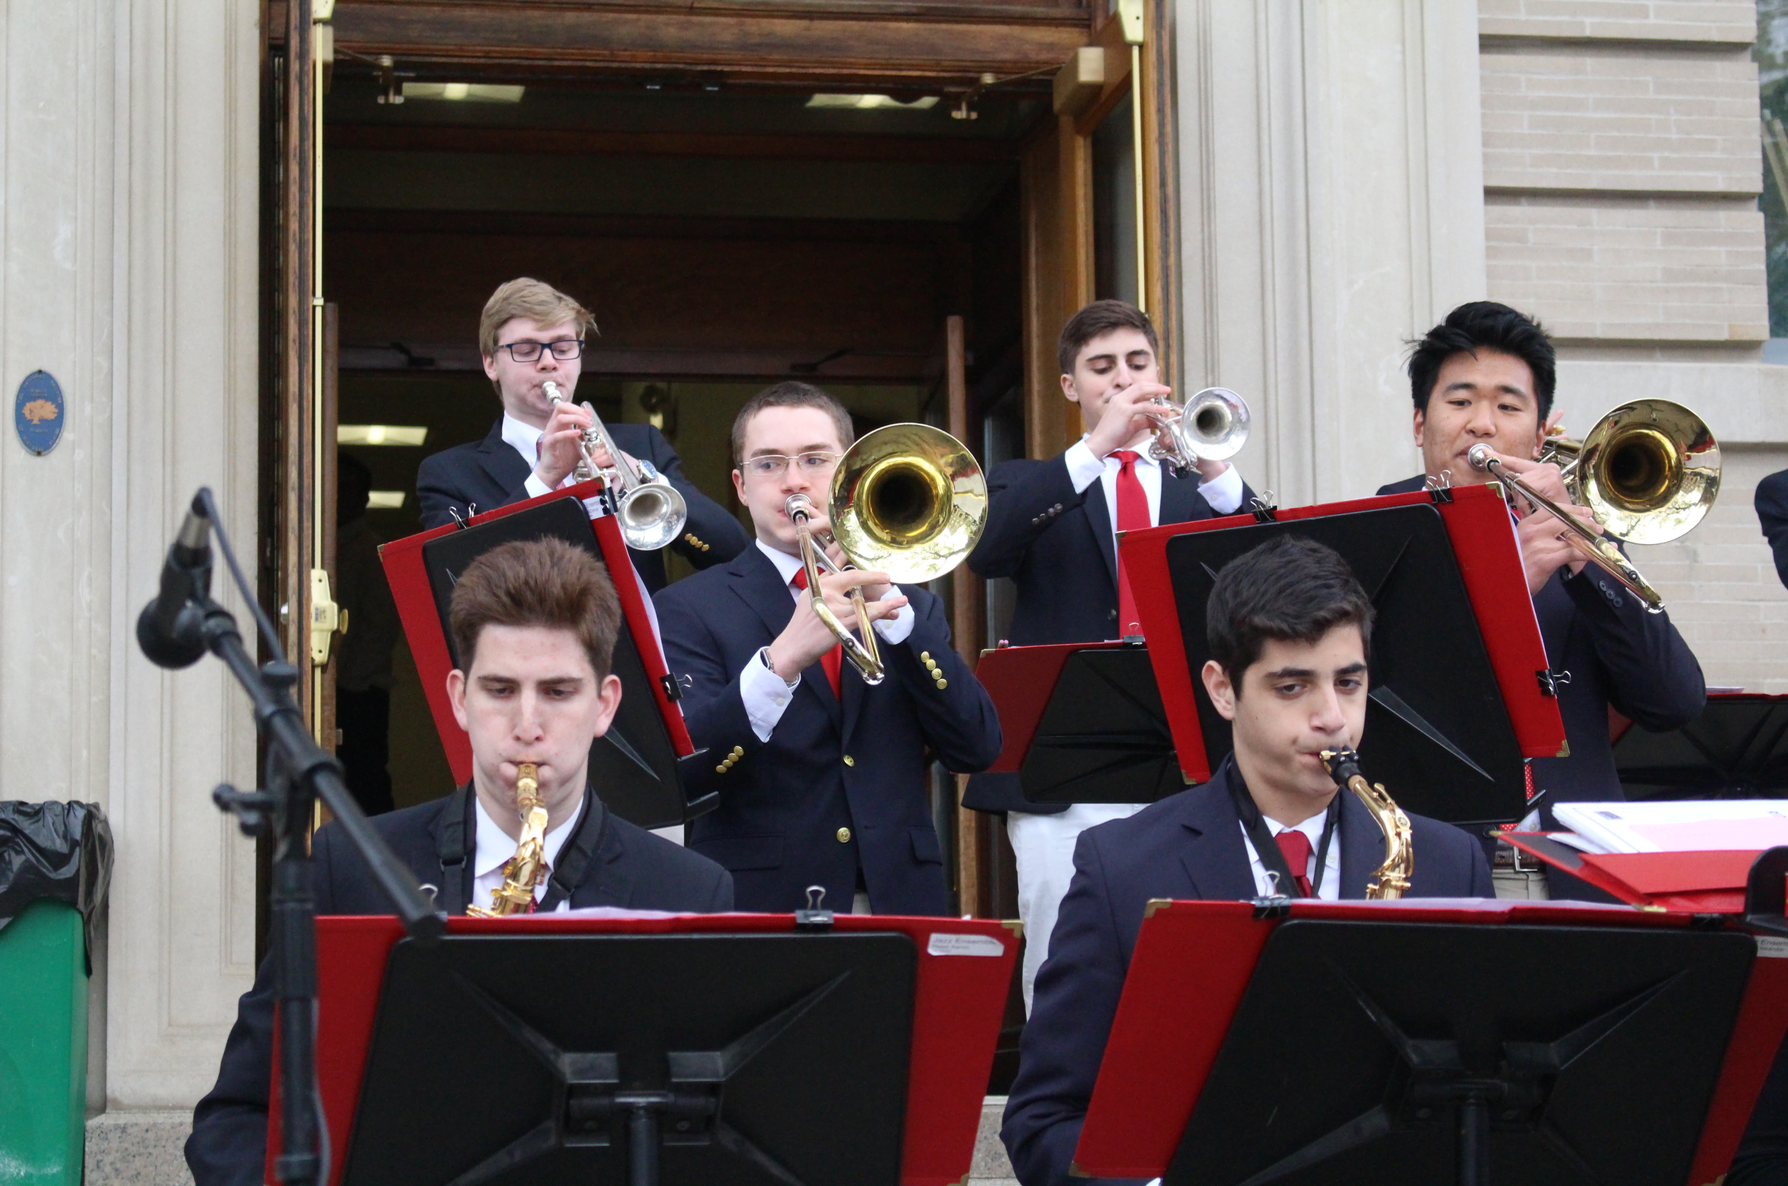 Greenwich High School bands played outside the Arts Council. May 4, 2017. Photo: Leslie Yager